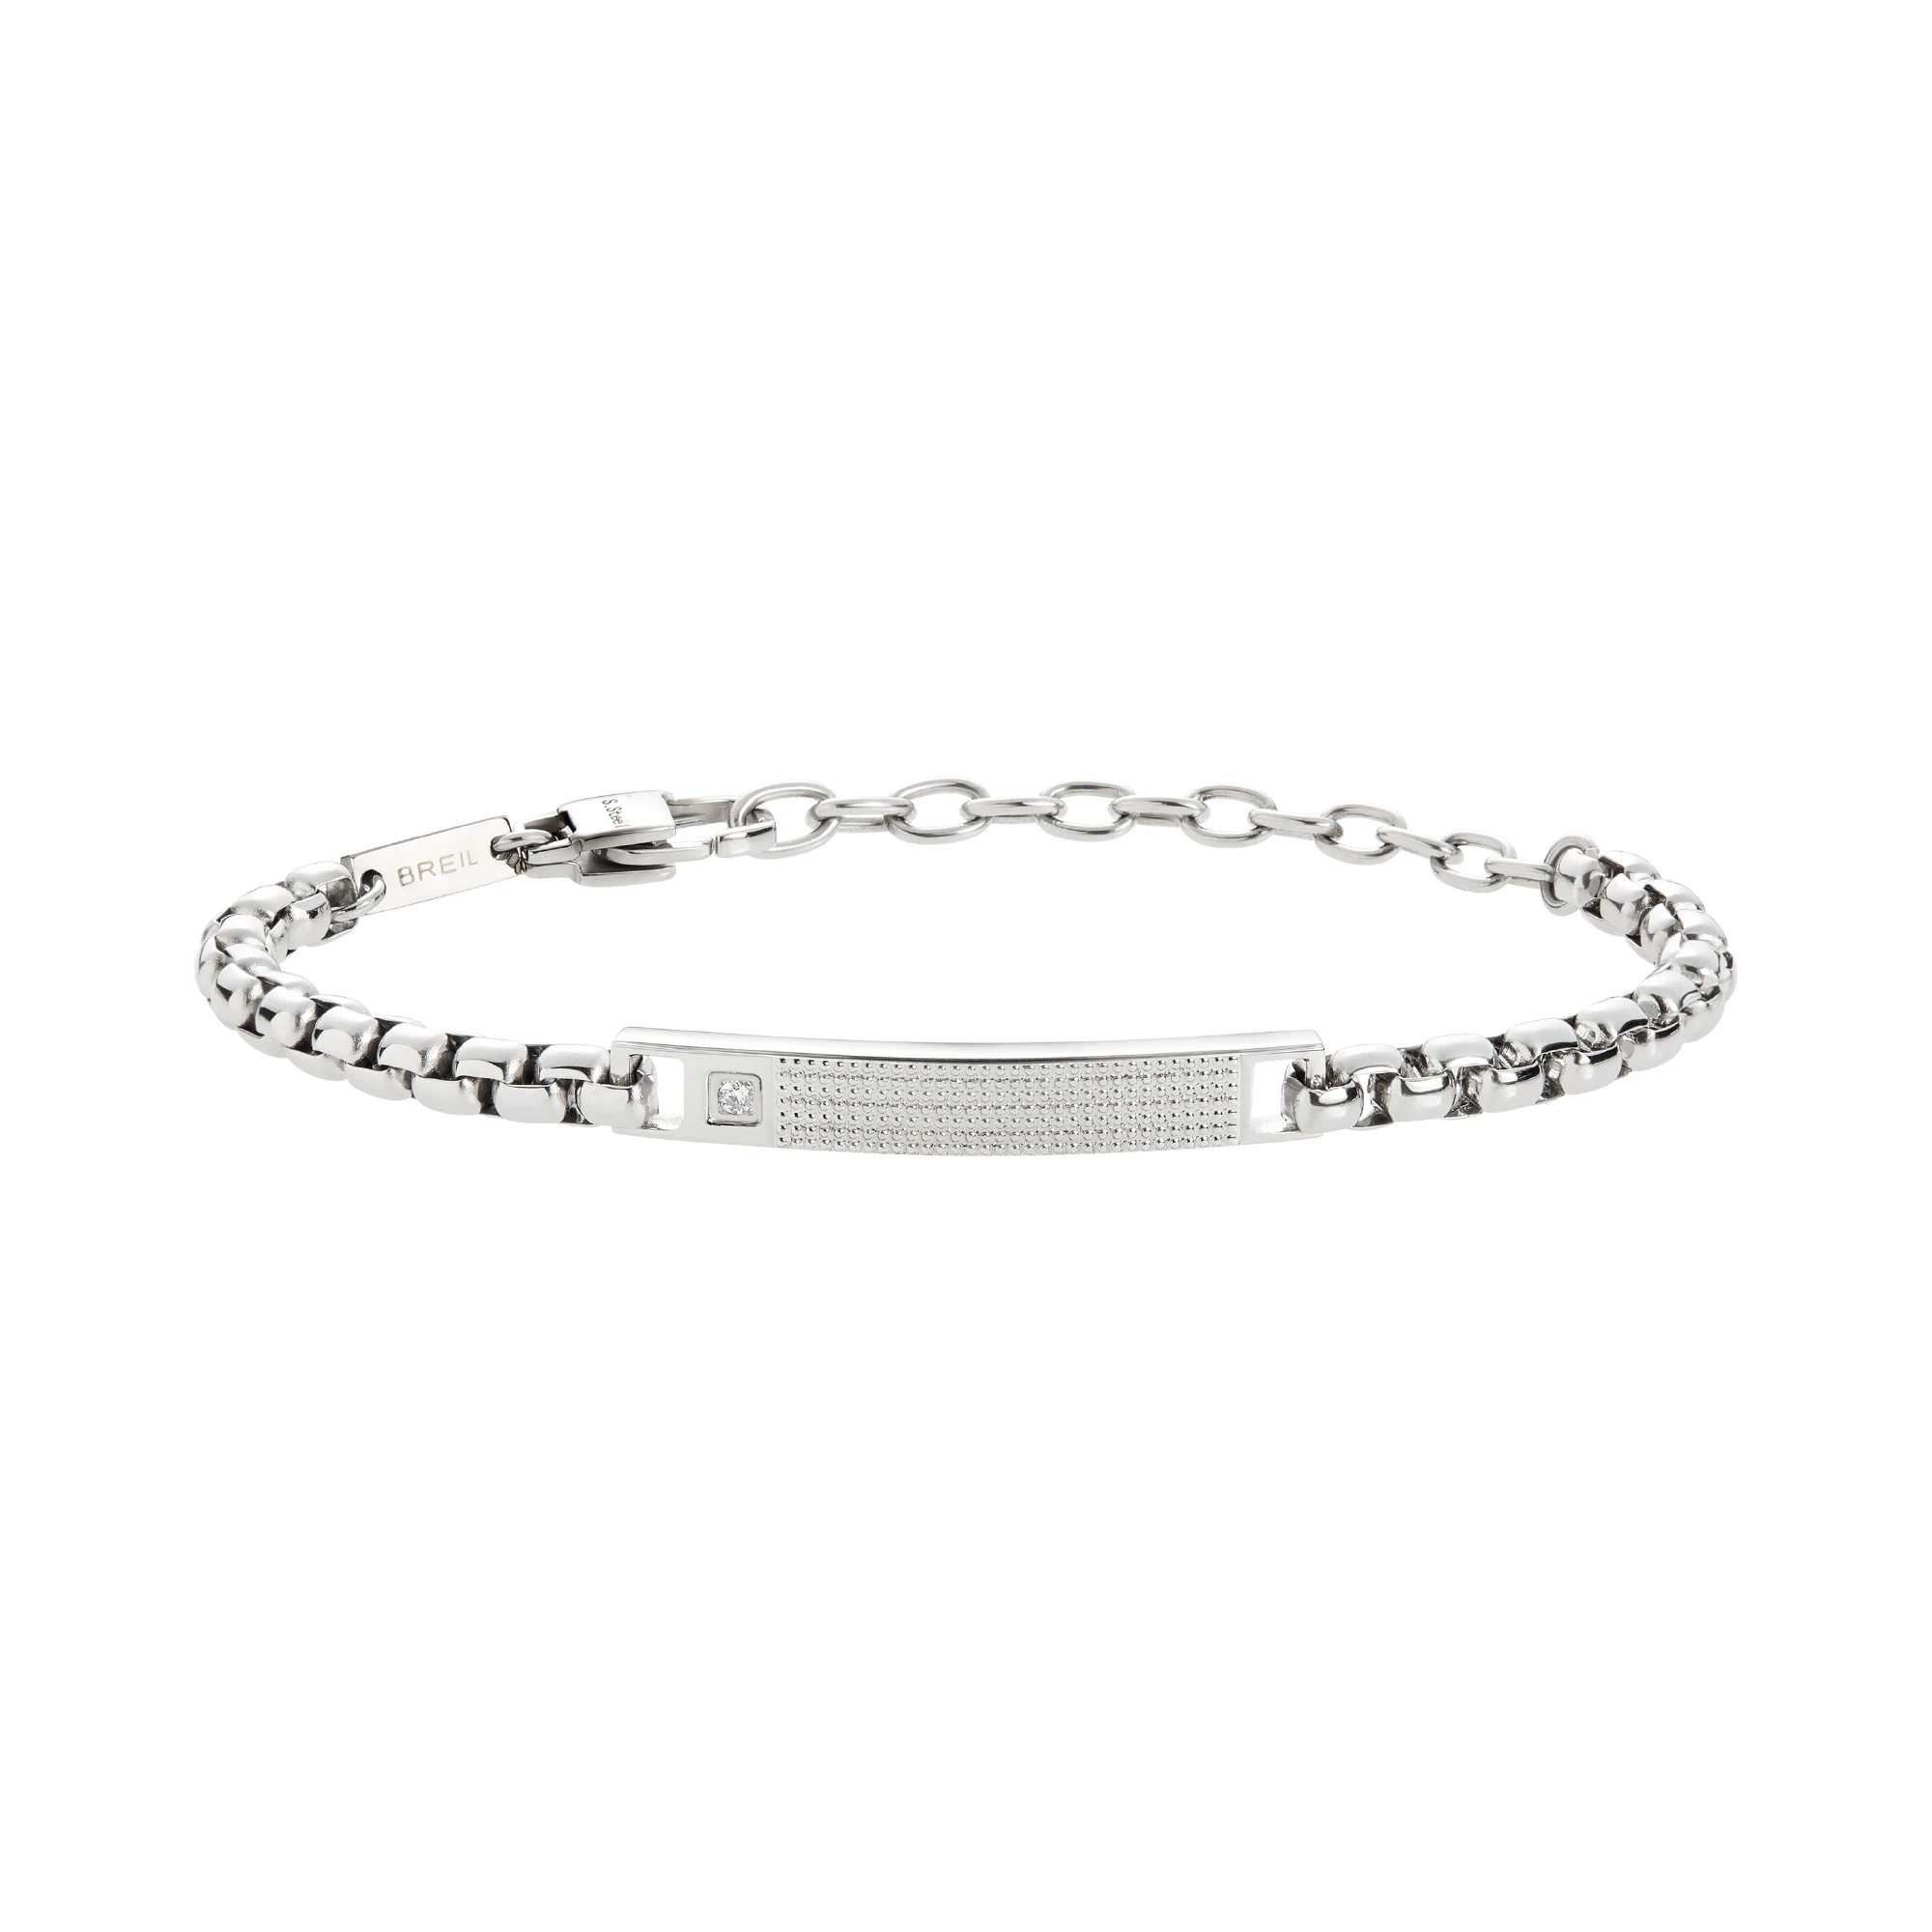 TAG AND CROSS - STAINLESS STEEL BRACELET WITH CUBIC ZIRCONIA - 1 - TJ3224 | Breil